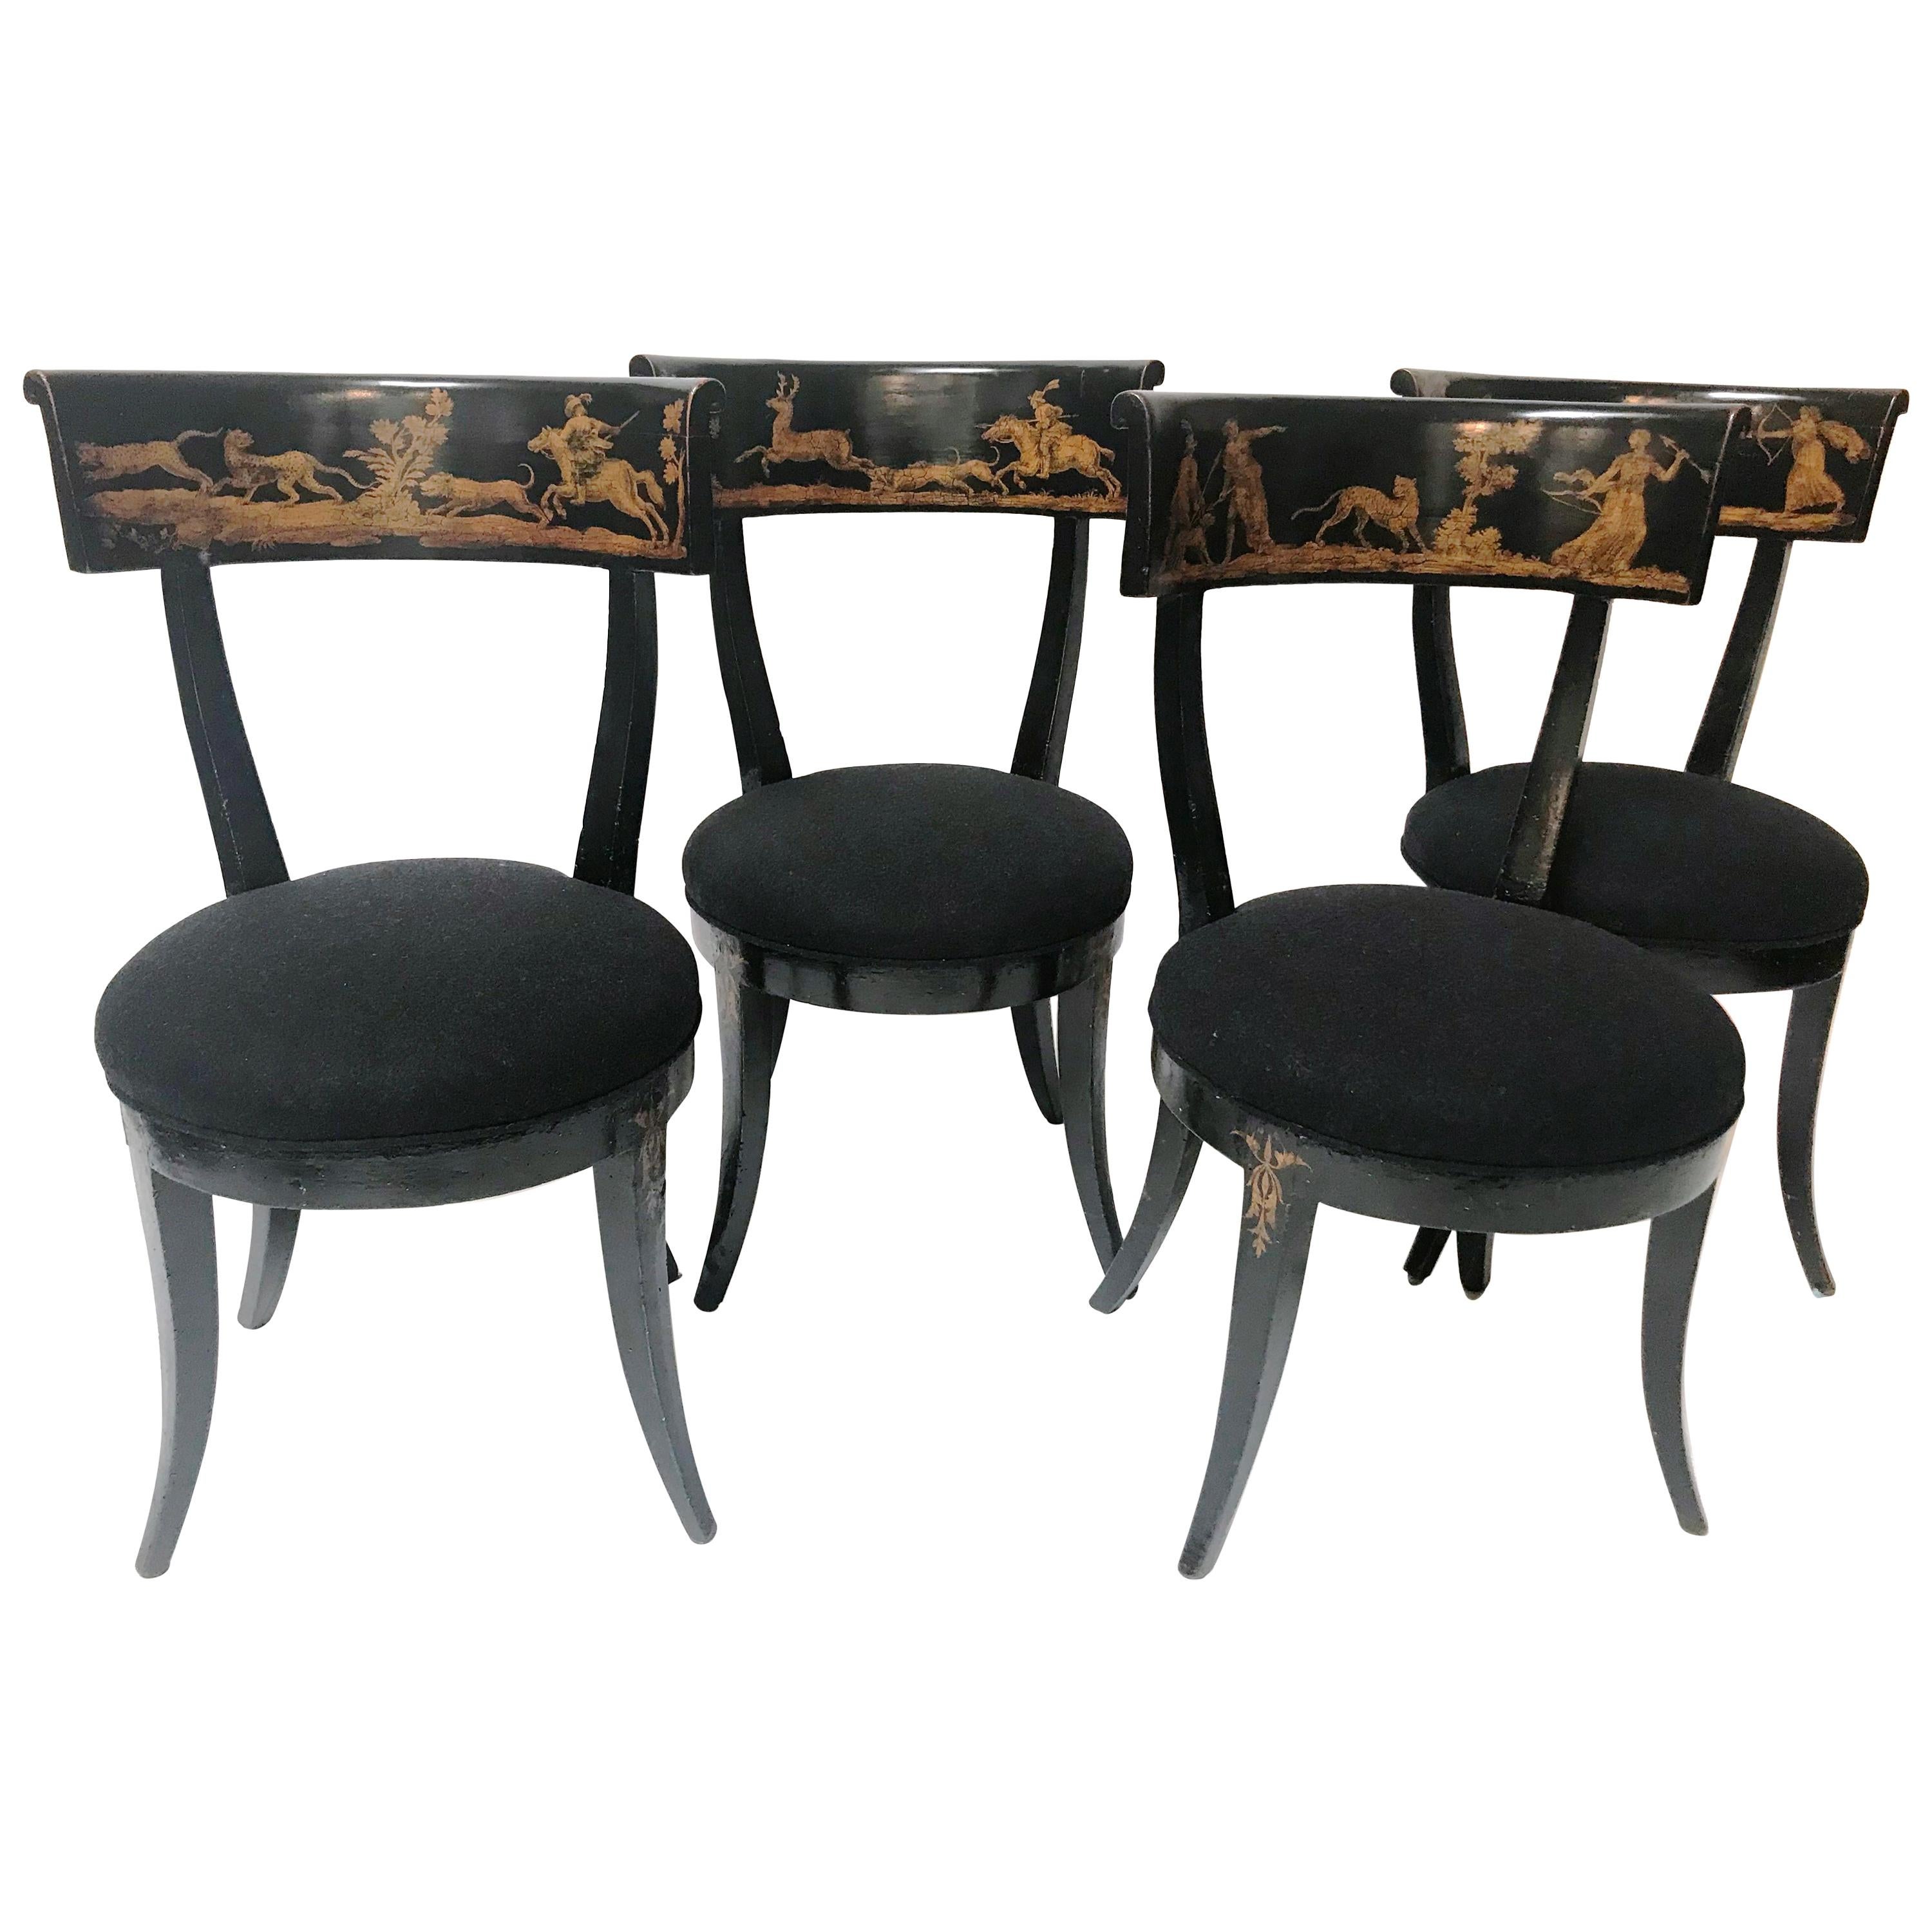 Late 18th Century Set of 4 Florentine Directoire Black Lacquer Saber Leg Chairs im Angebot